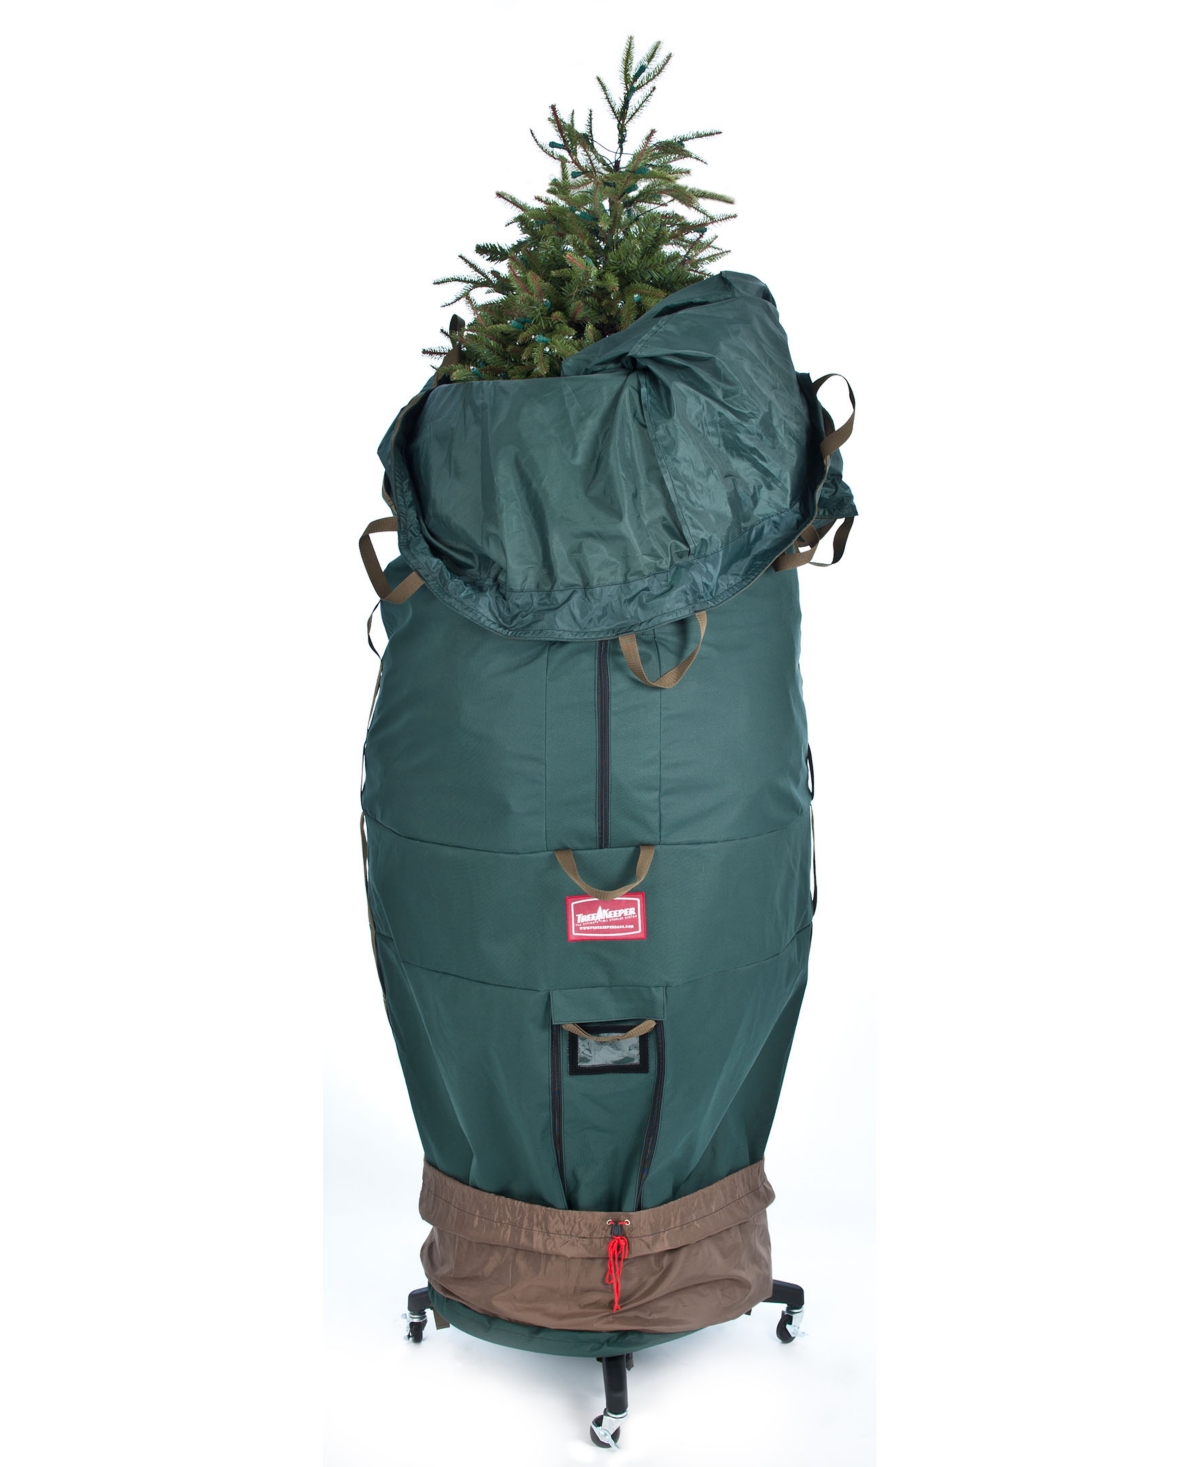 Large Girth Upright Christmas Tree Storage Bag with Wheels - Green